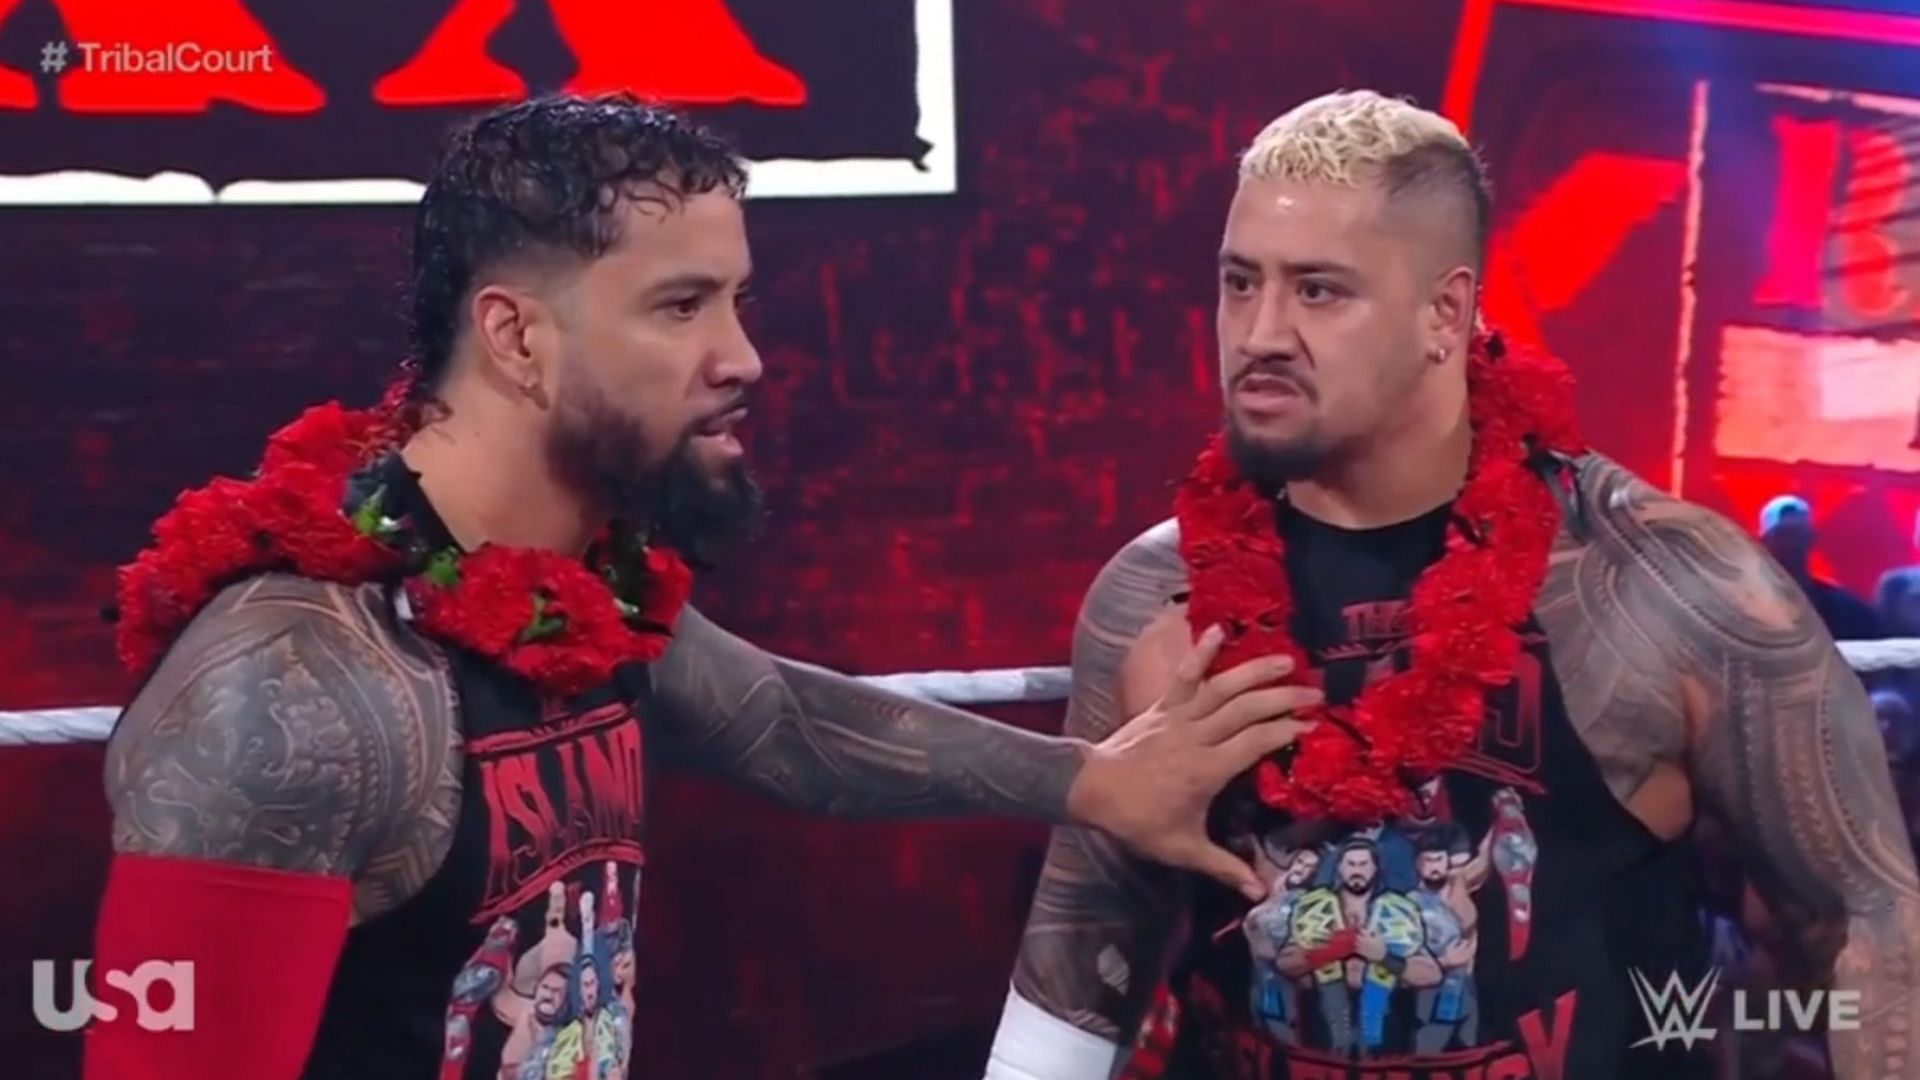 Both Jey Uso and Solo Sikoa have plenty of reasons to want a Royal Rumble win.